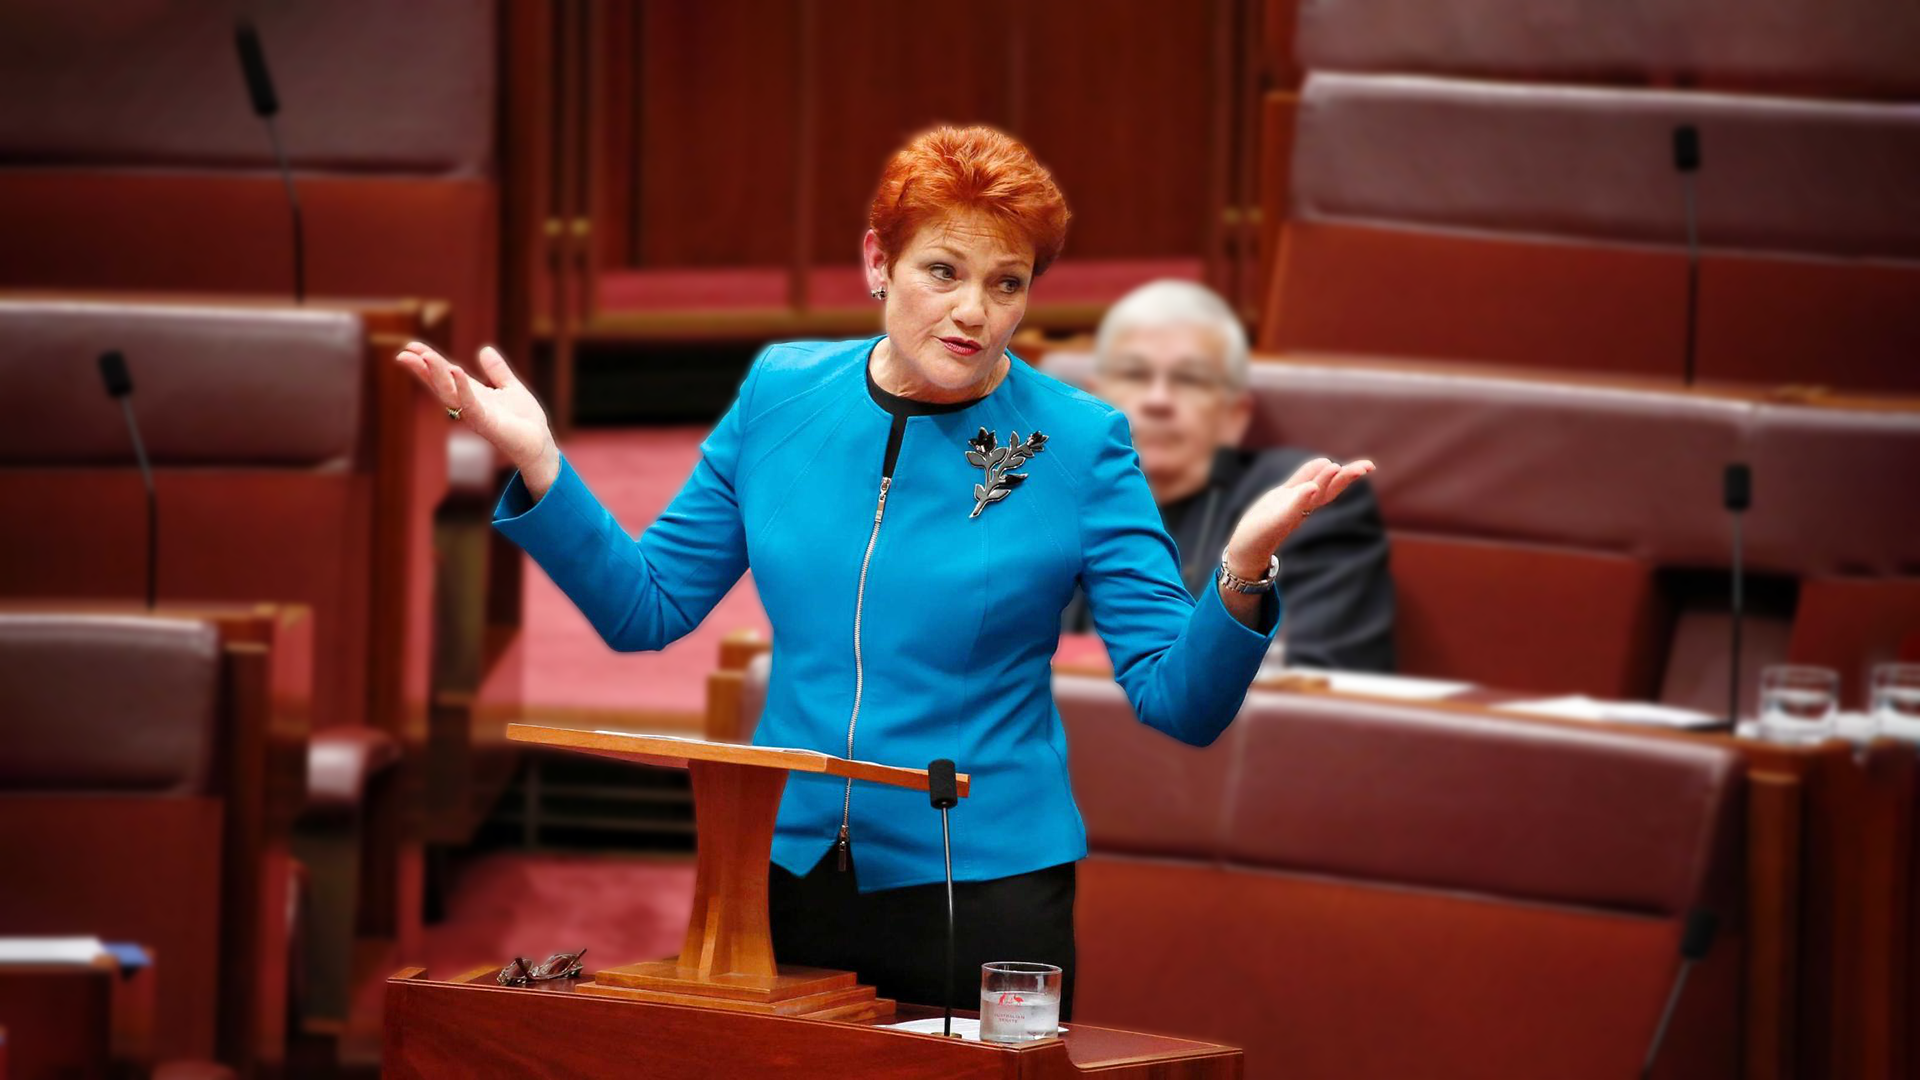 High Quality Pauline Hanson shrugs - I told you so "Swamped by Asians" Blank Meme Template